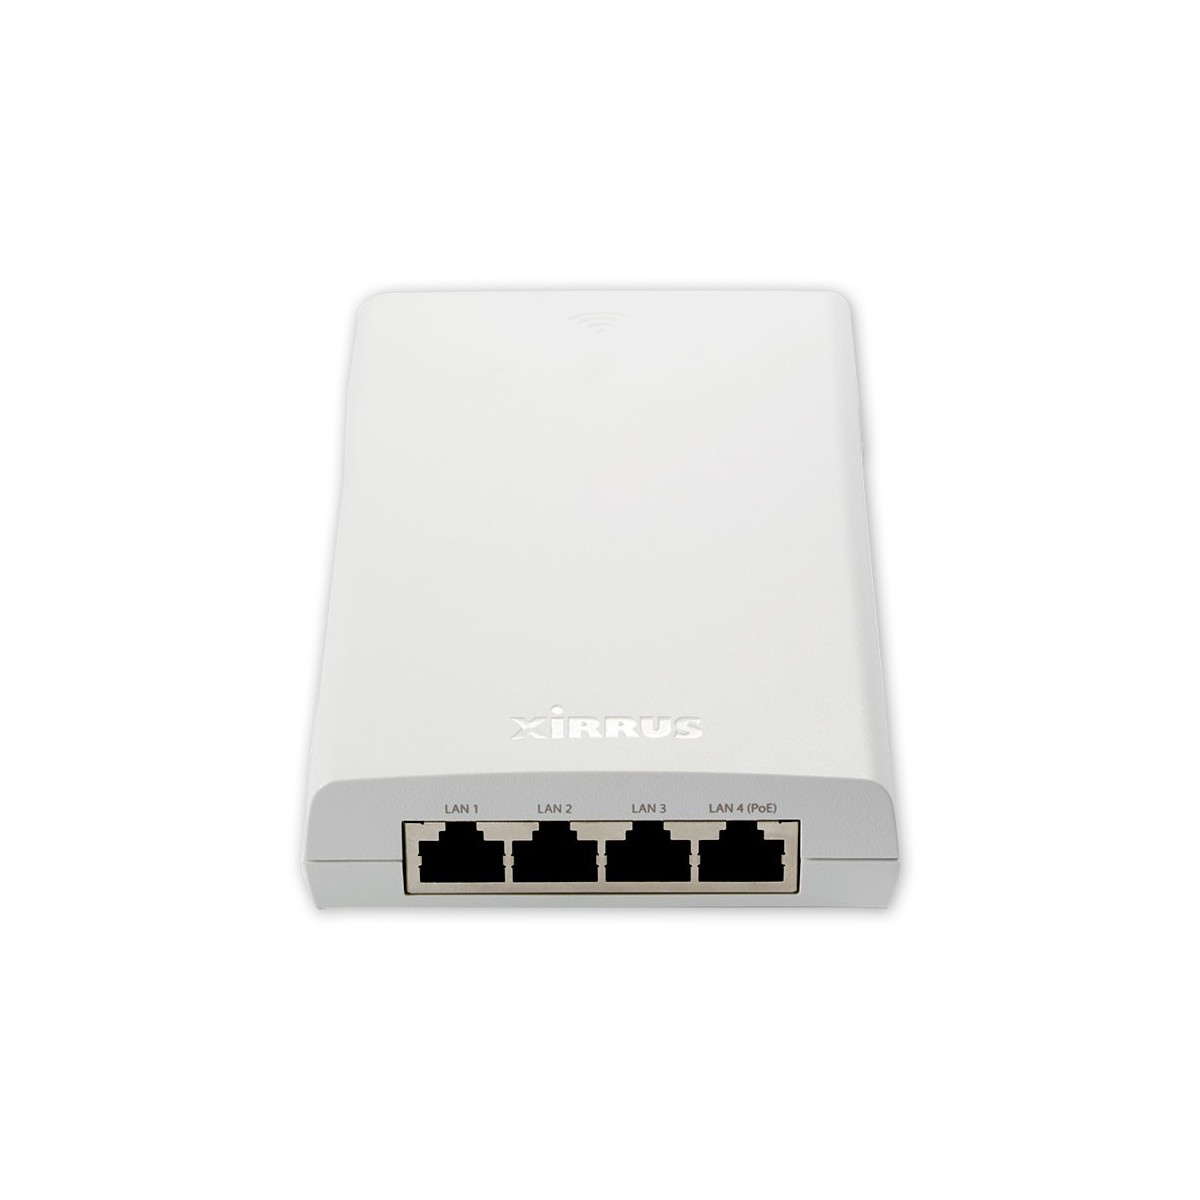 Cambium Networks Cambium Xirrus XR-320 Indoor 2x2 Wall Plate AP. Dual radio 11ac/11n 5GHz/2.4GHz. - Access Point